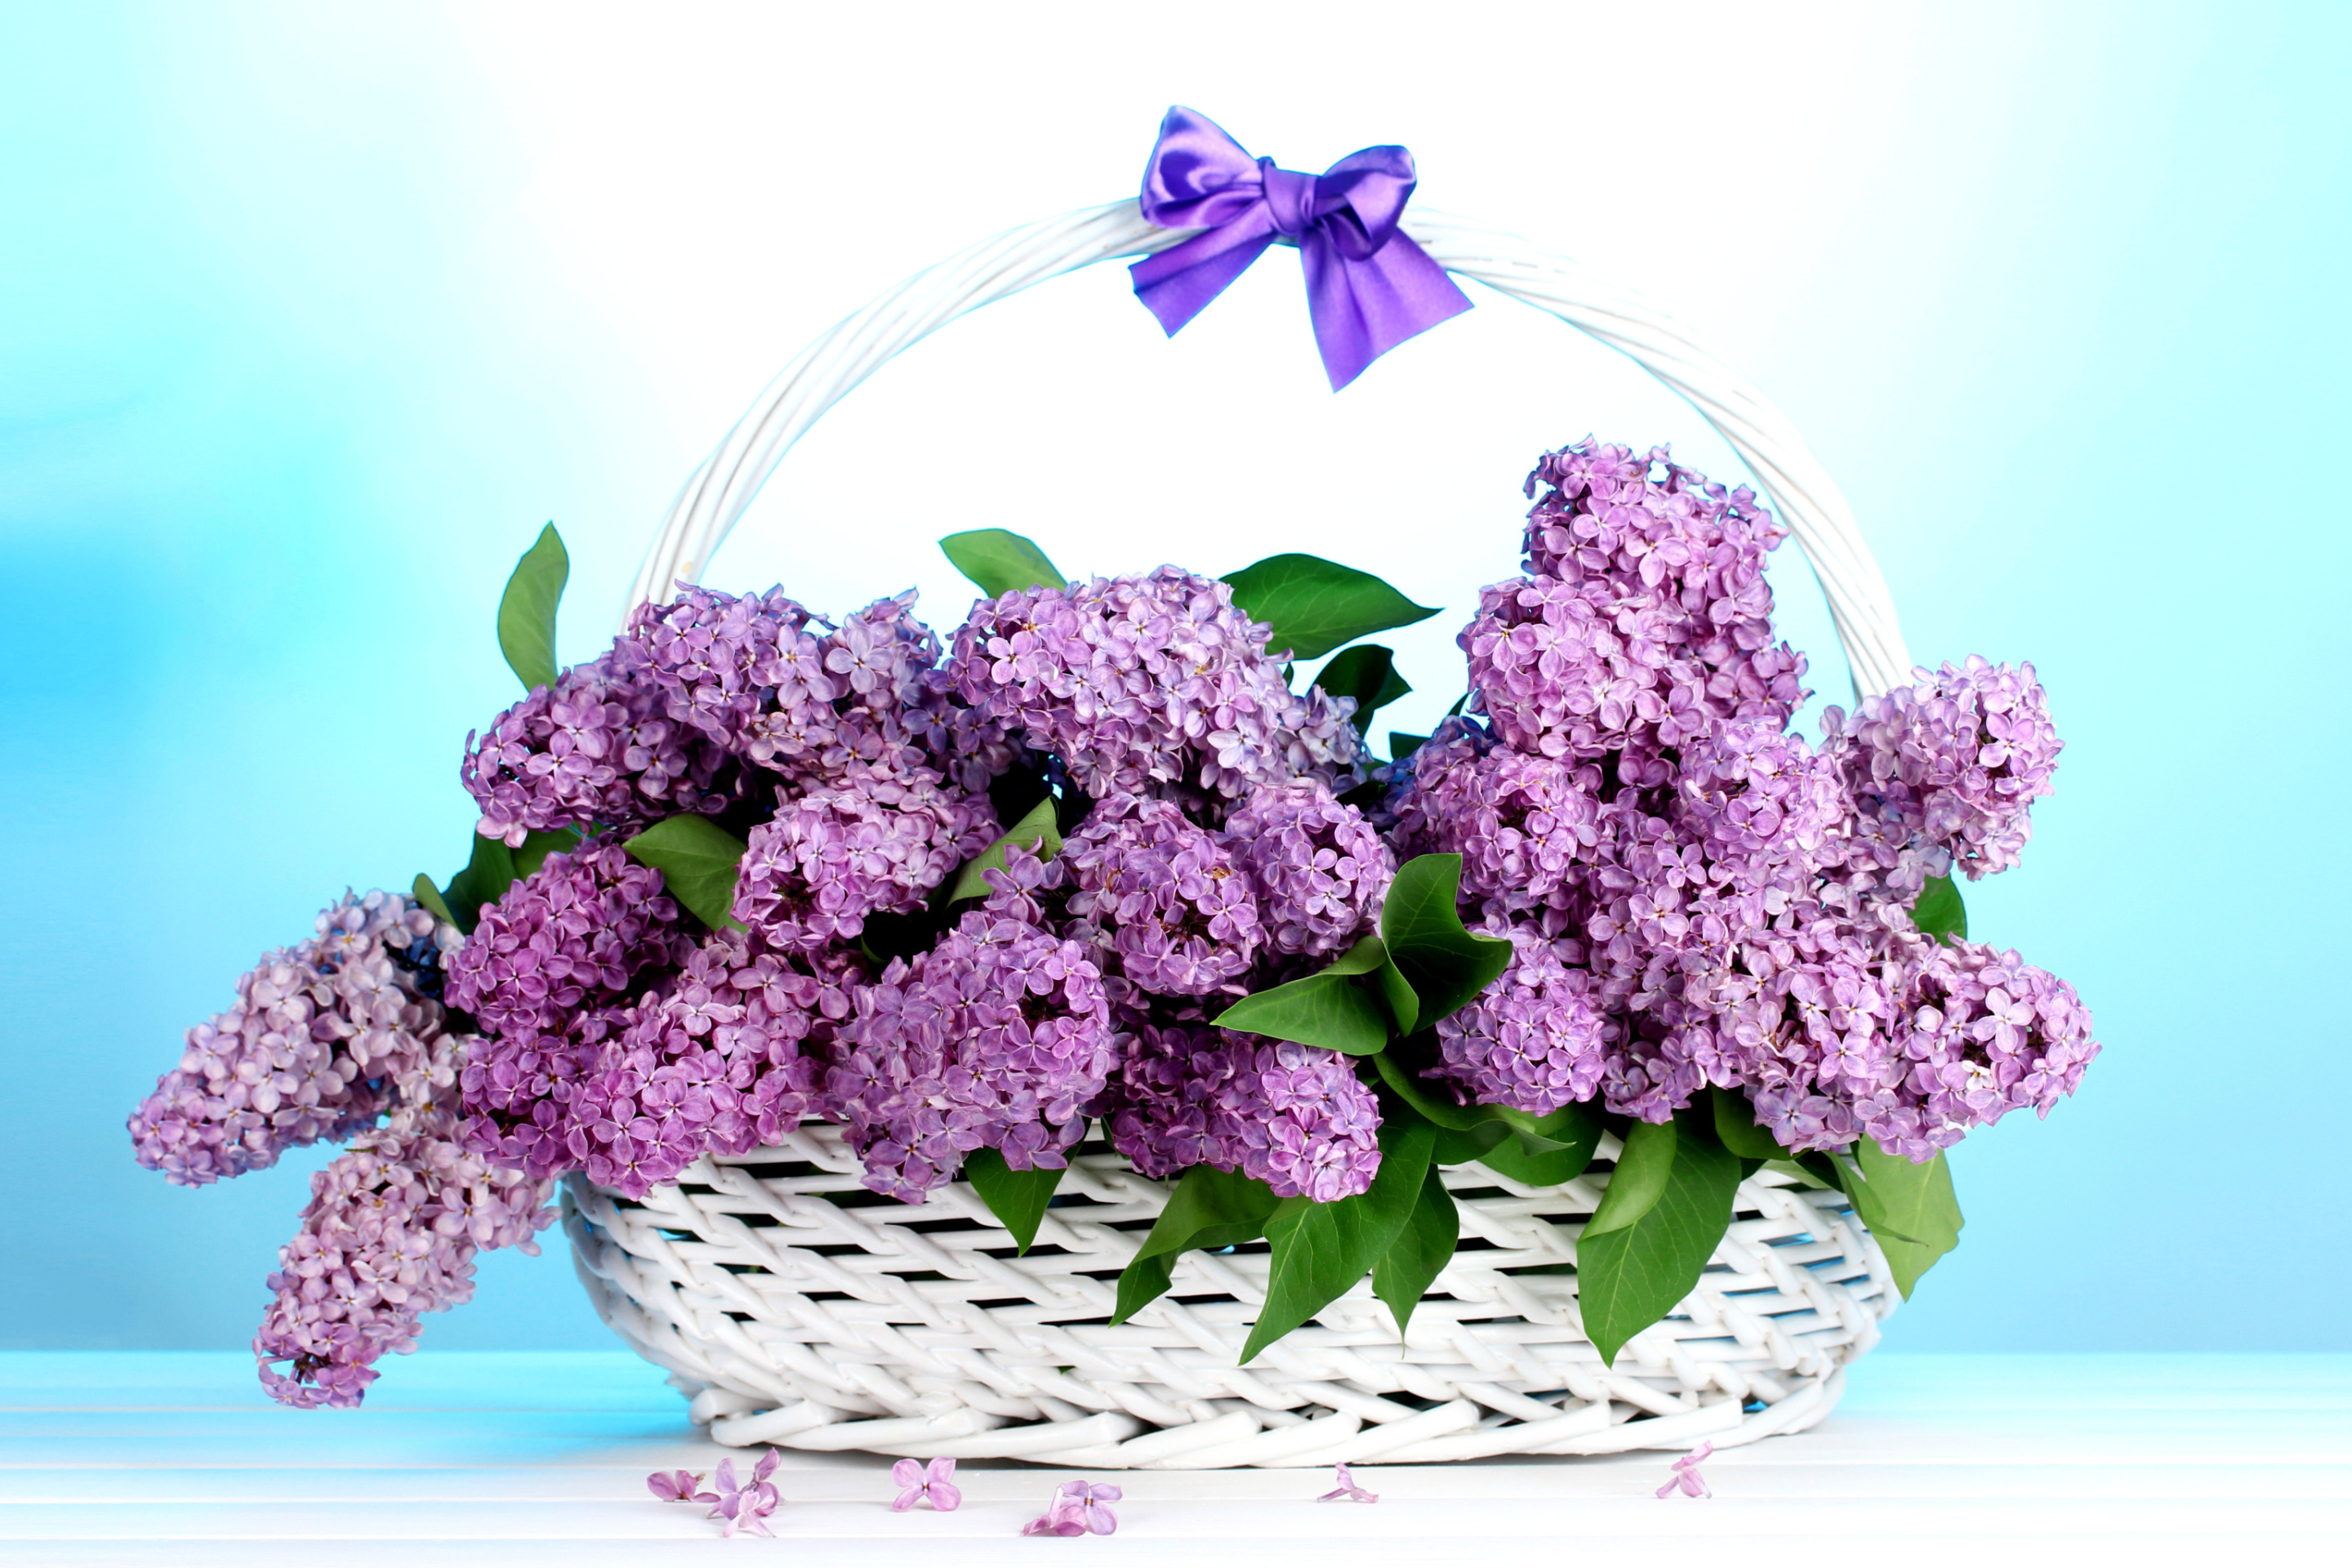 Baskets with lilac flowers wallpaper 2880x1920